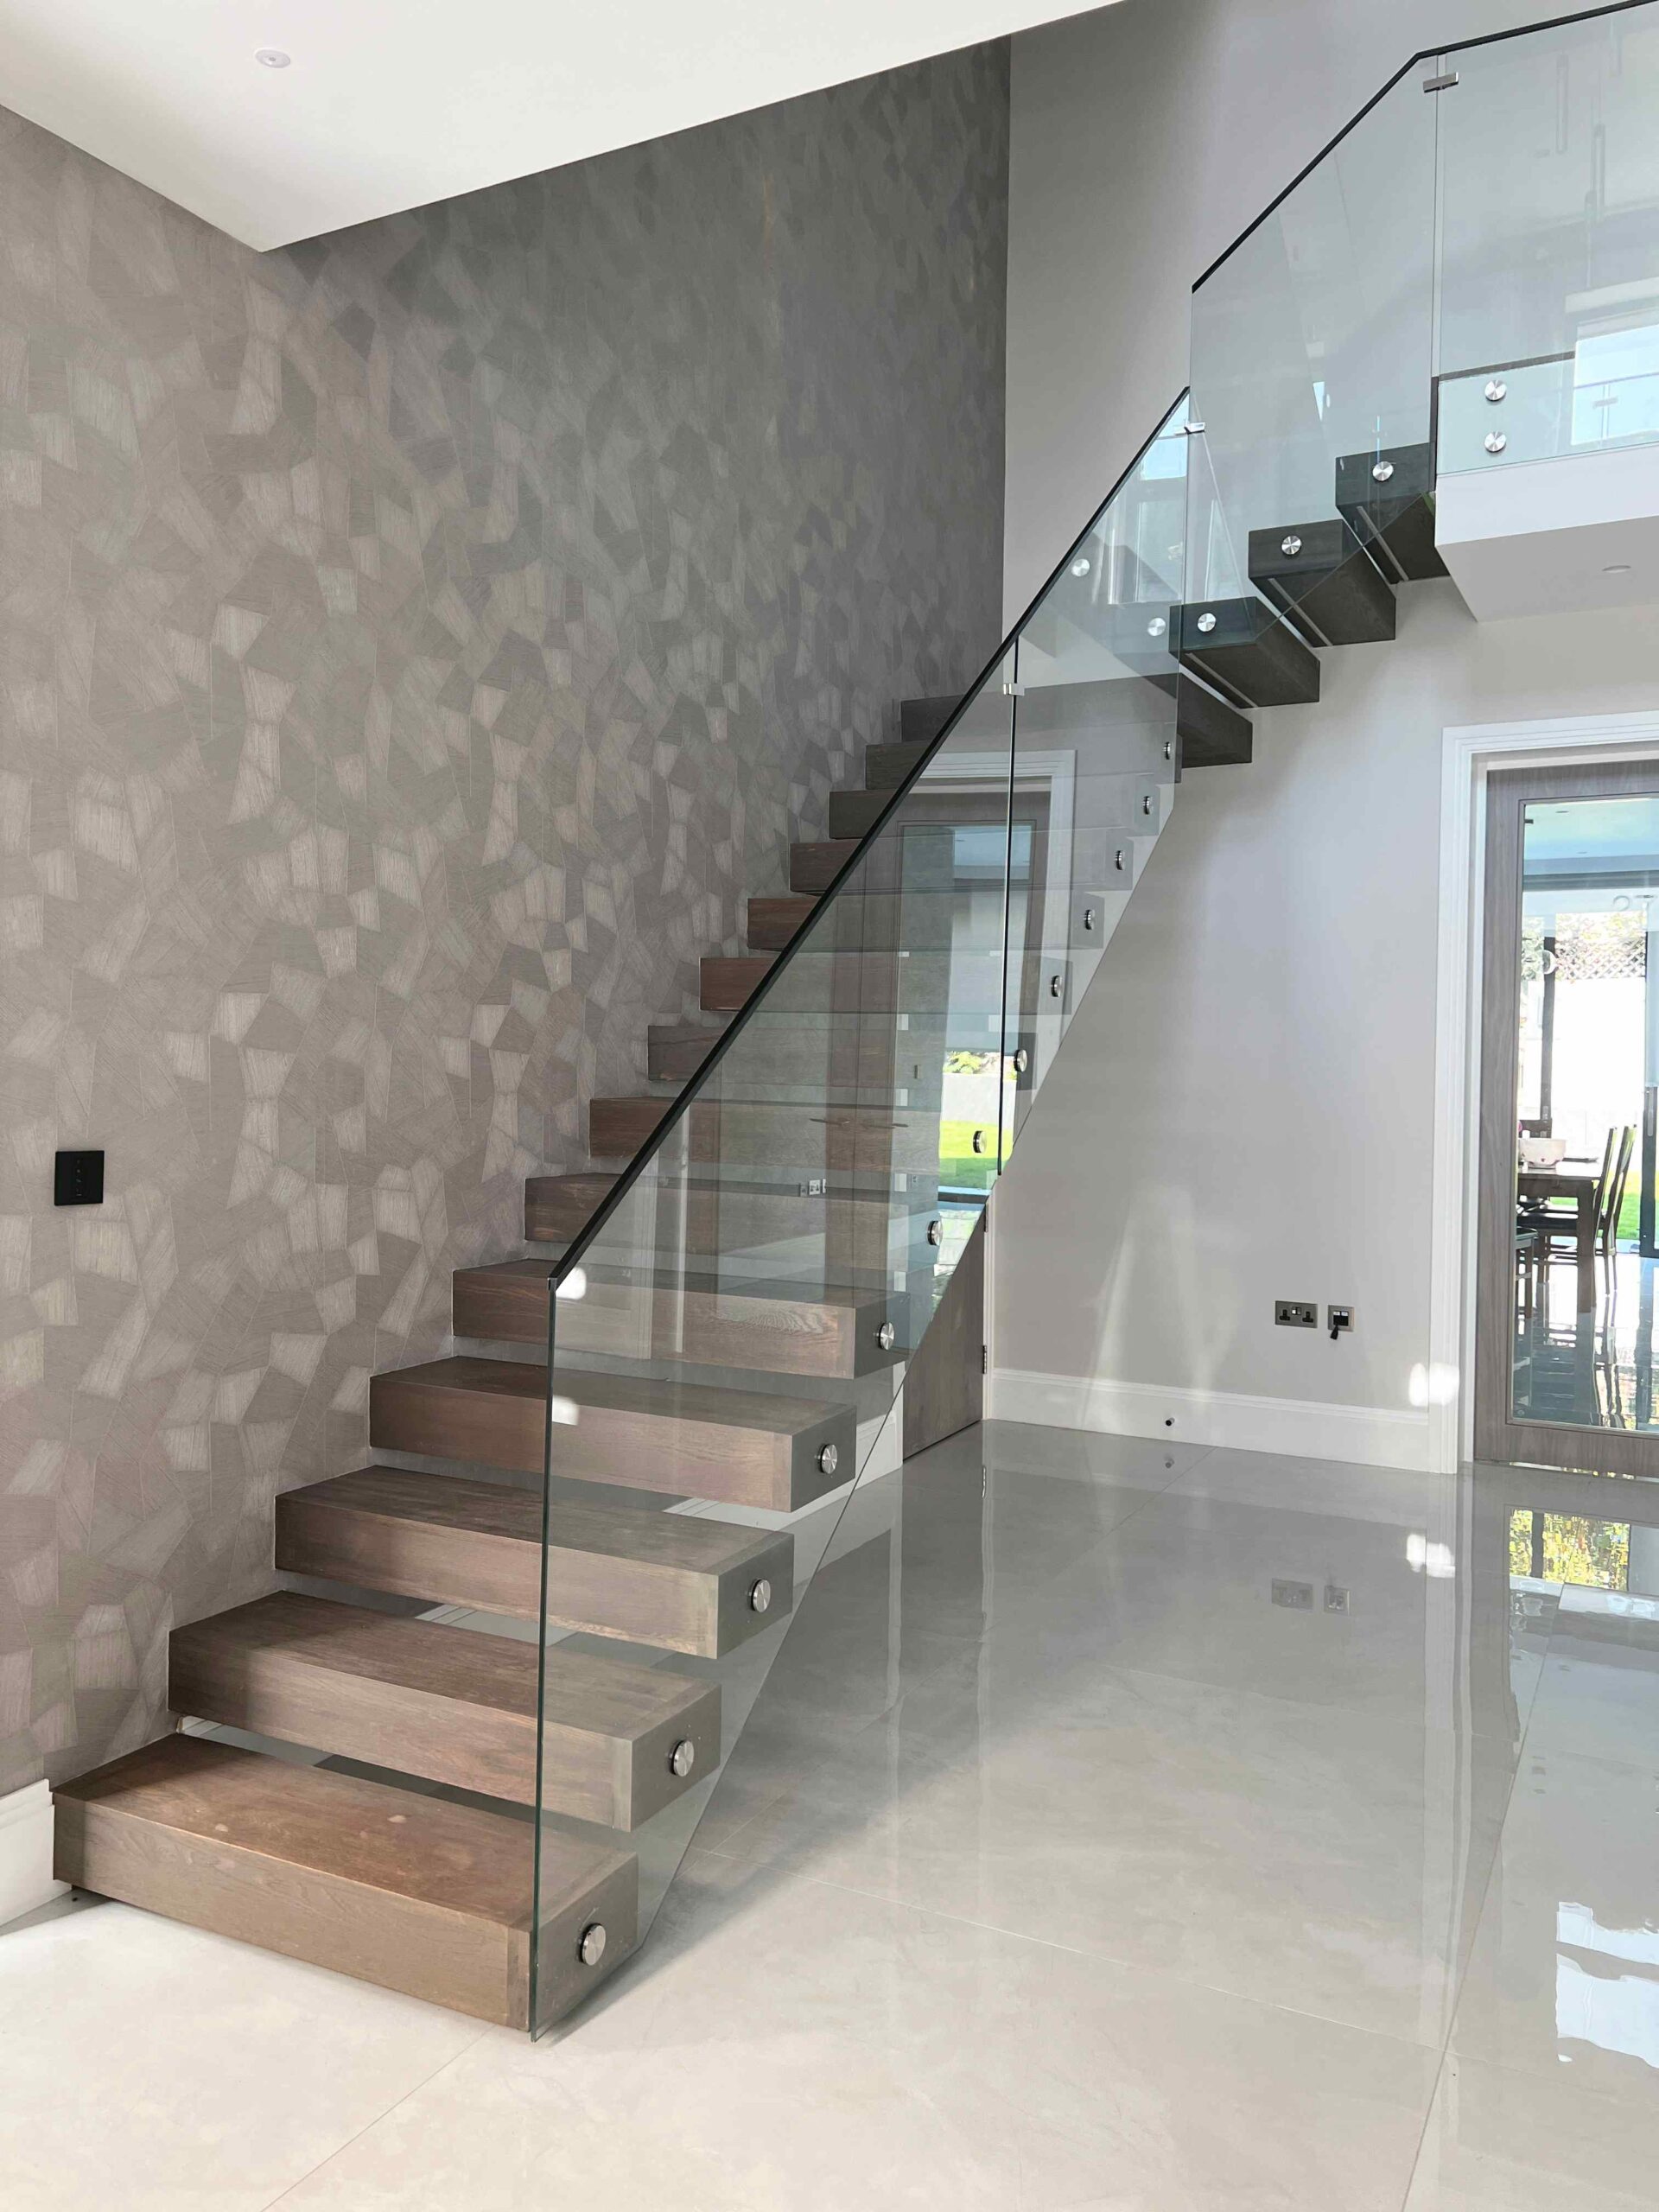 Floating staircase with glass balustrade